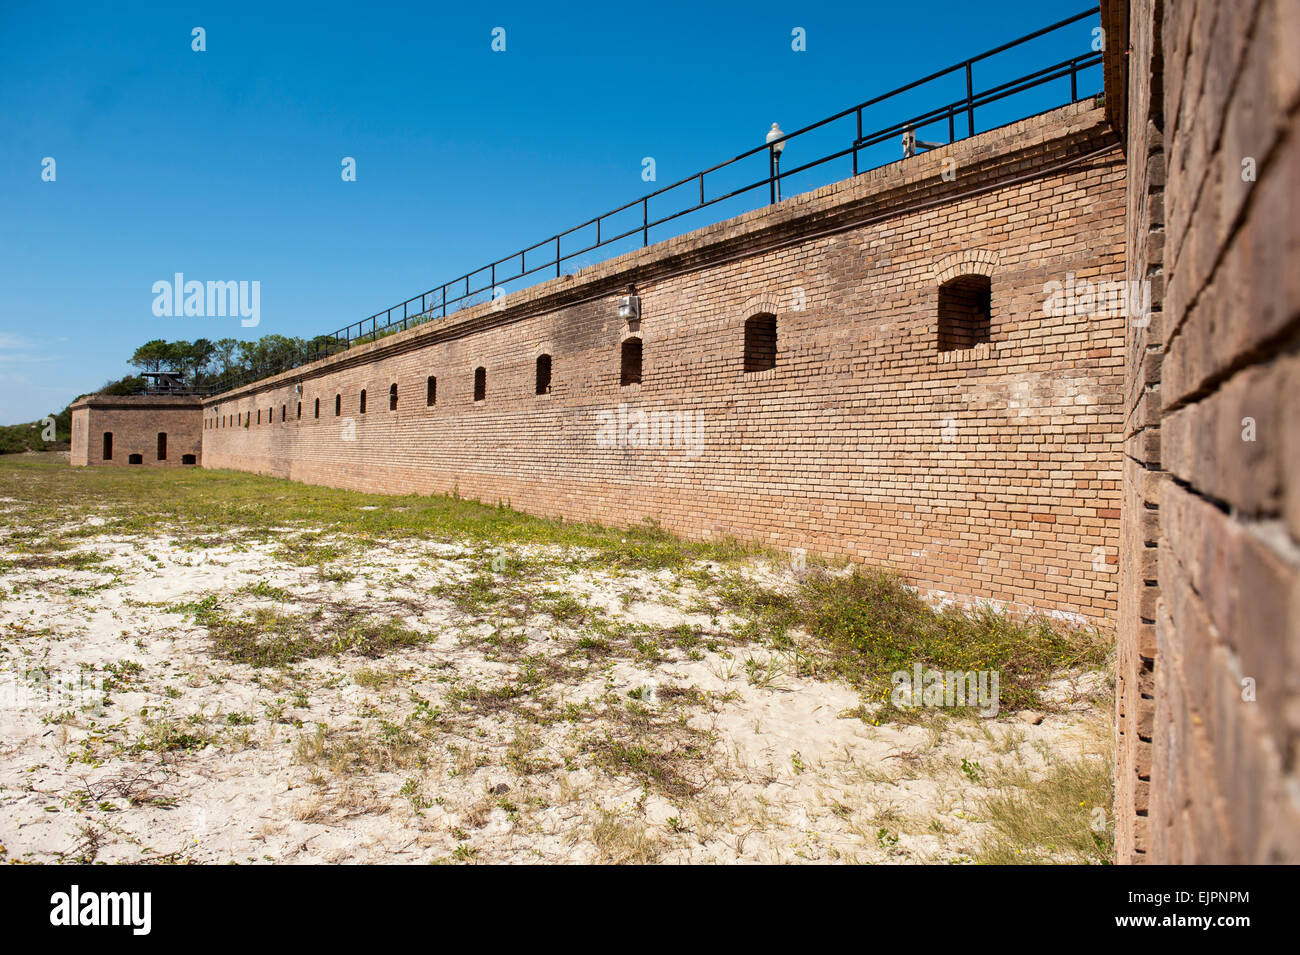 Brick Wall at Historic Military Fort Gaines on Dauphin Island in Mobile Bay, Alabama Stock Photo